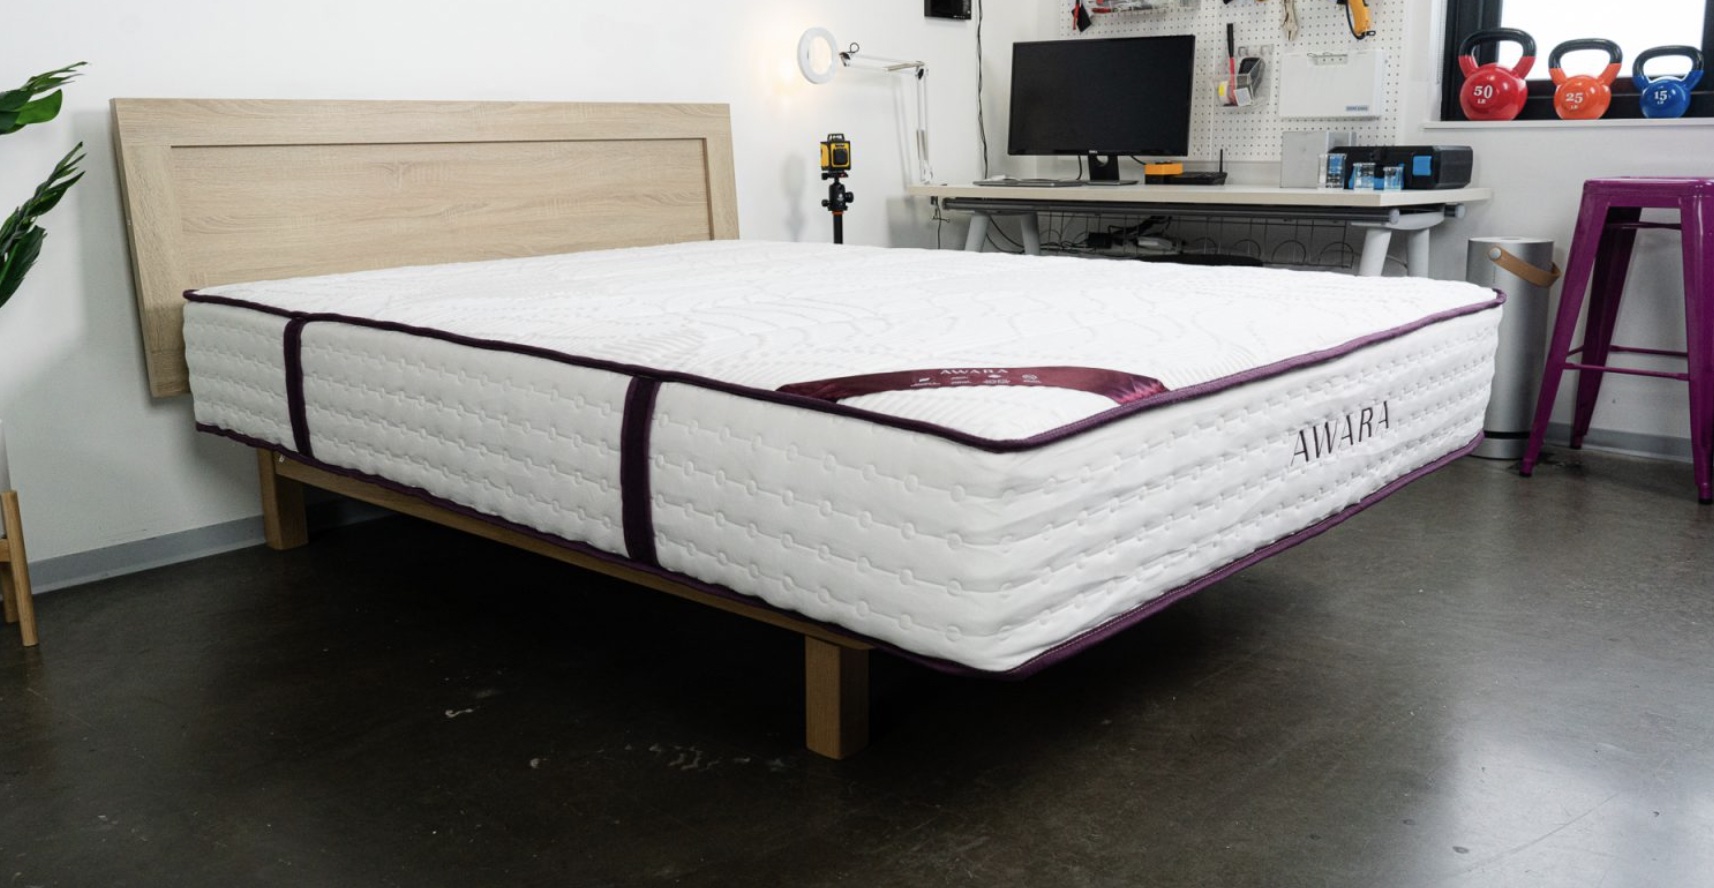 Photo of the Awara Mattress in our Seattle Test Lab